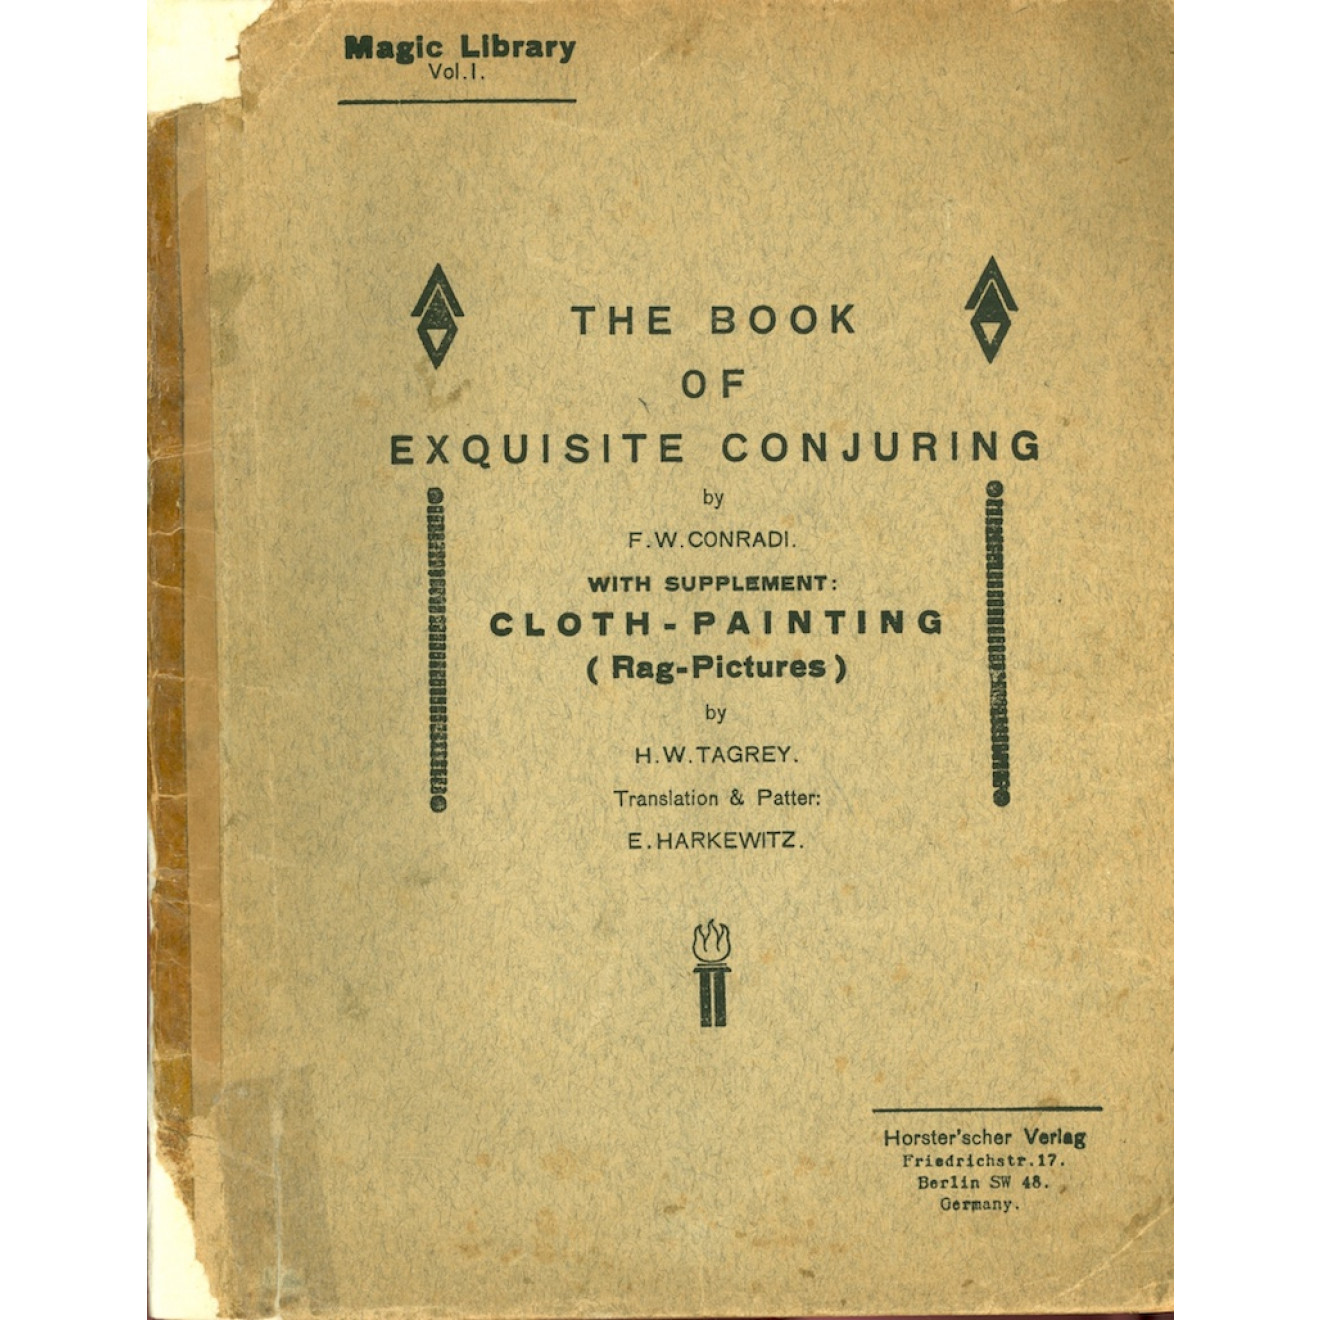 The Book of Exquisite Conjuring